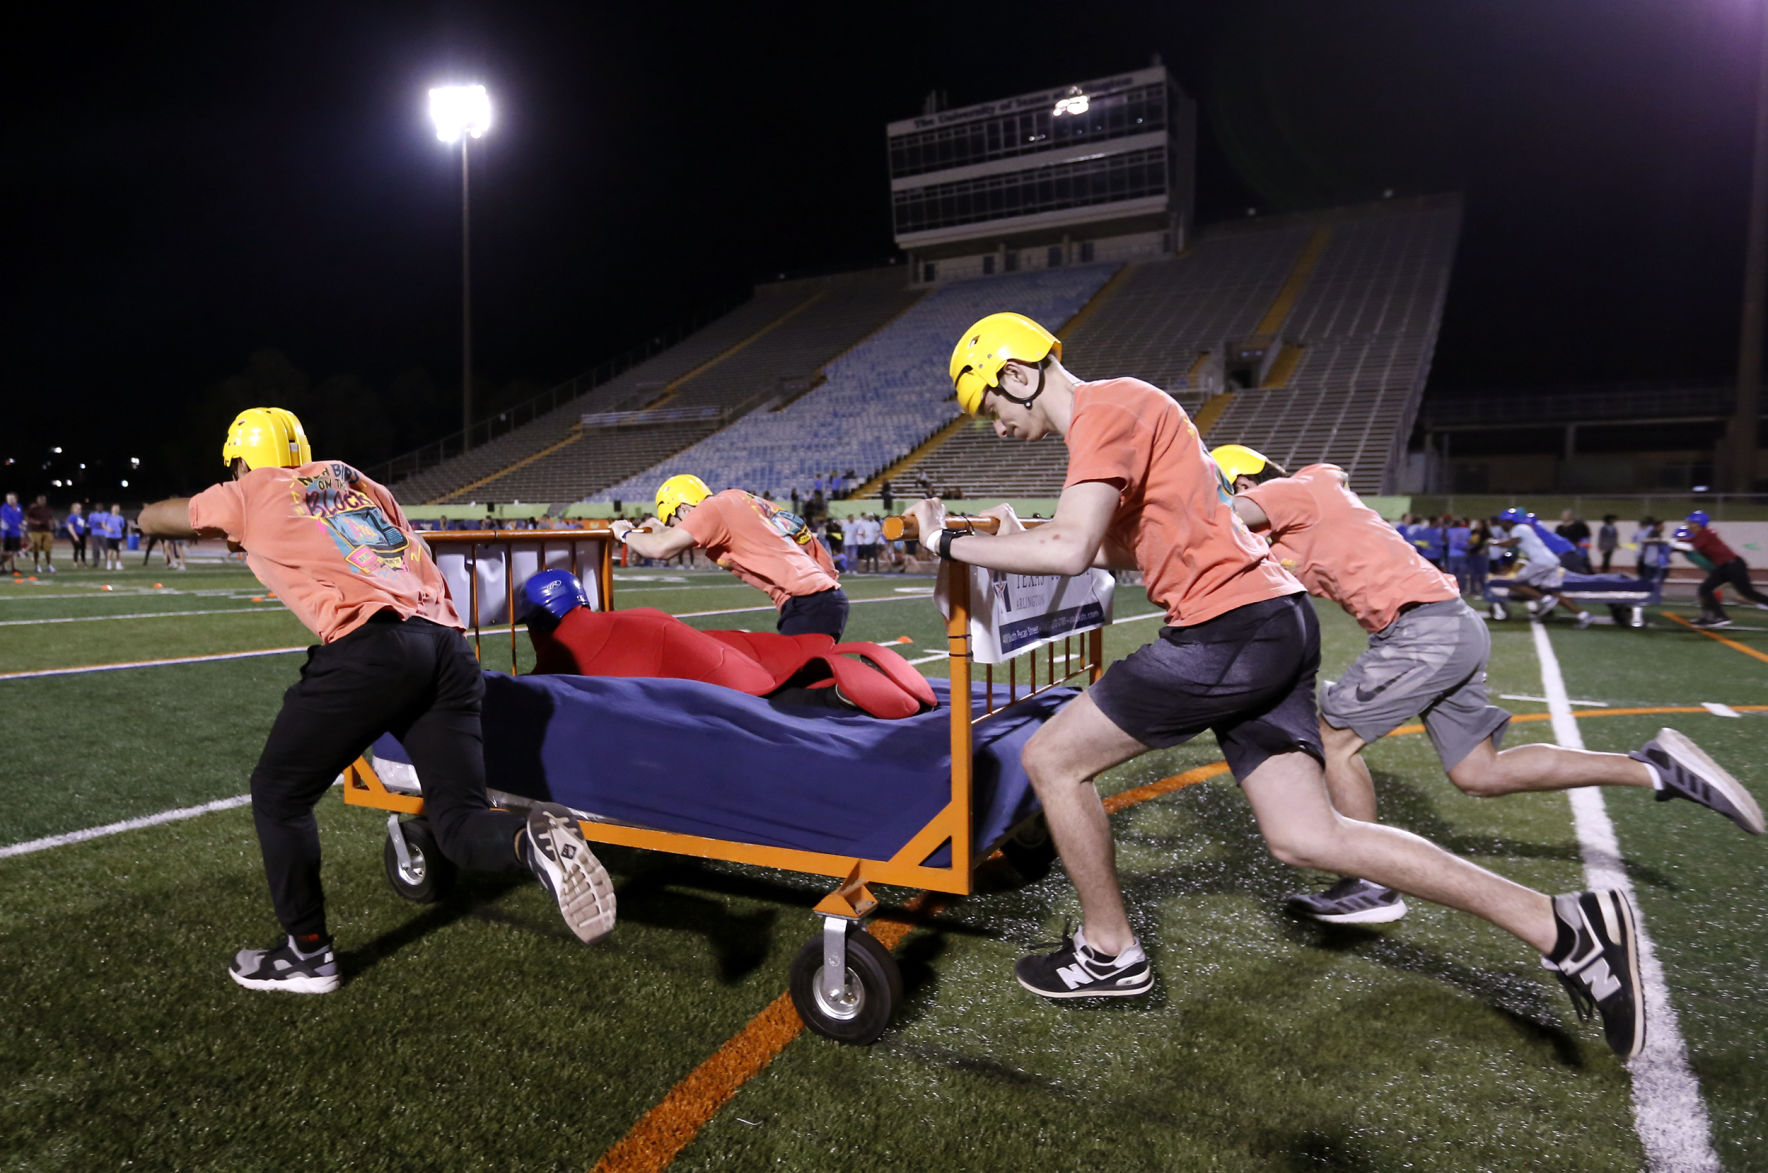 Bed Races a tradition embedded in UTA's culture News